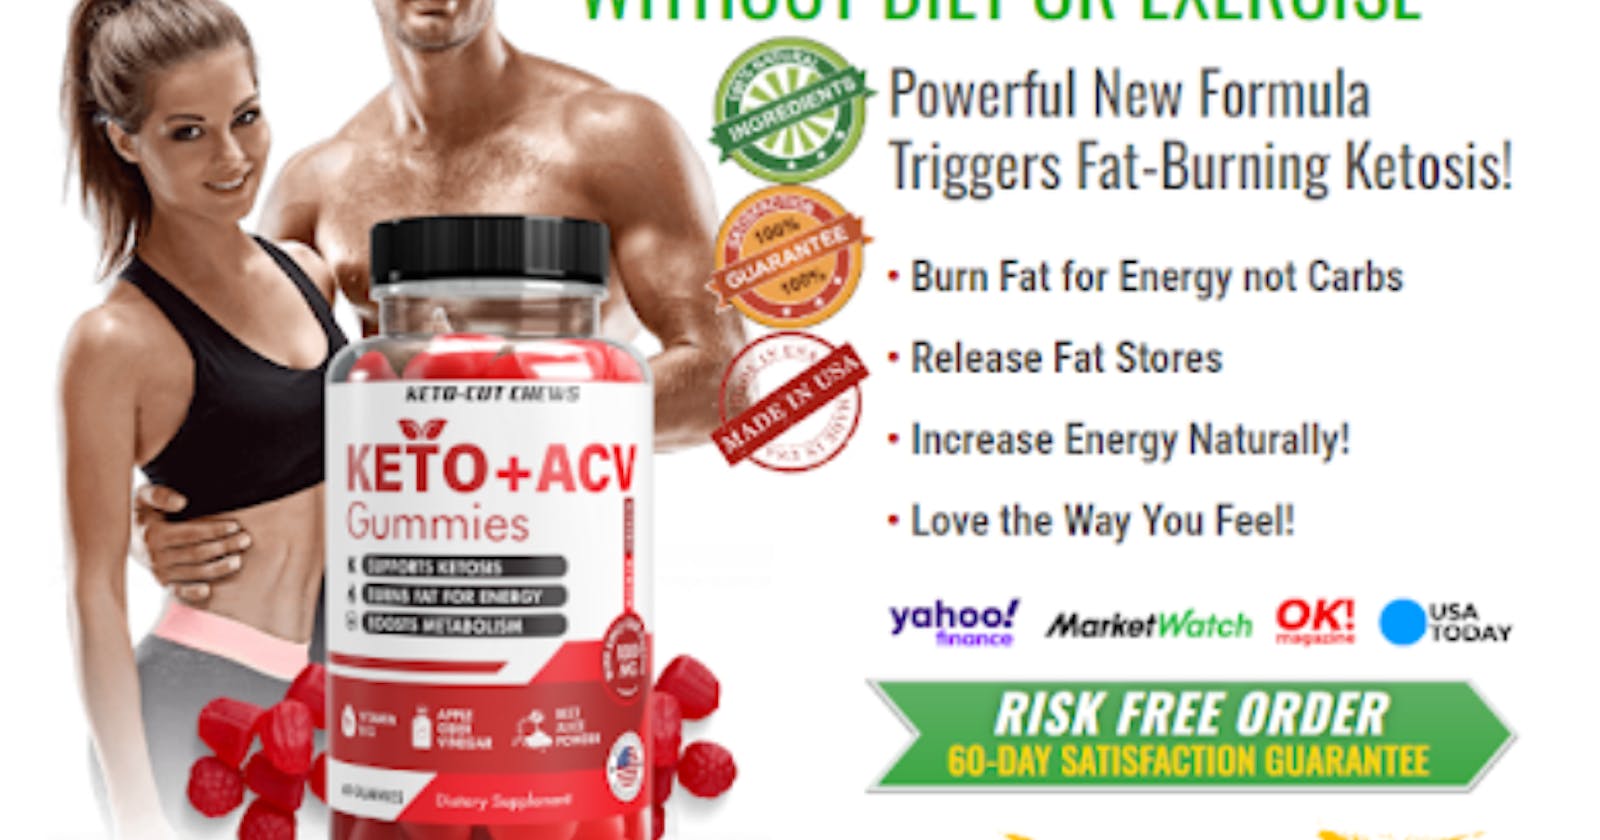 Keto Cut + ACV Gummies  Review: Are These Fat Burning Pills Legit?